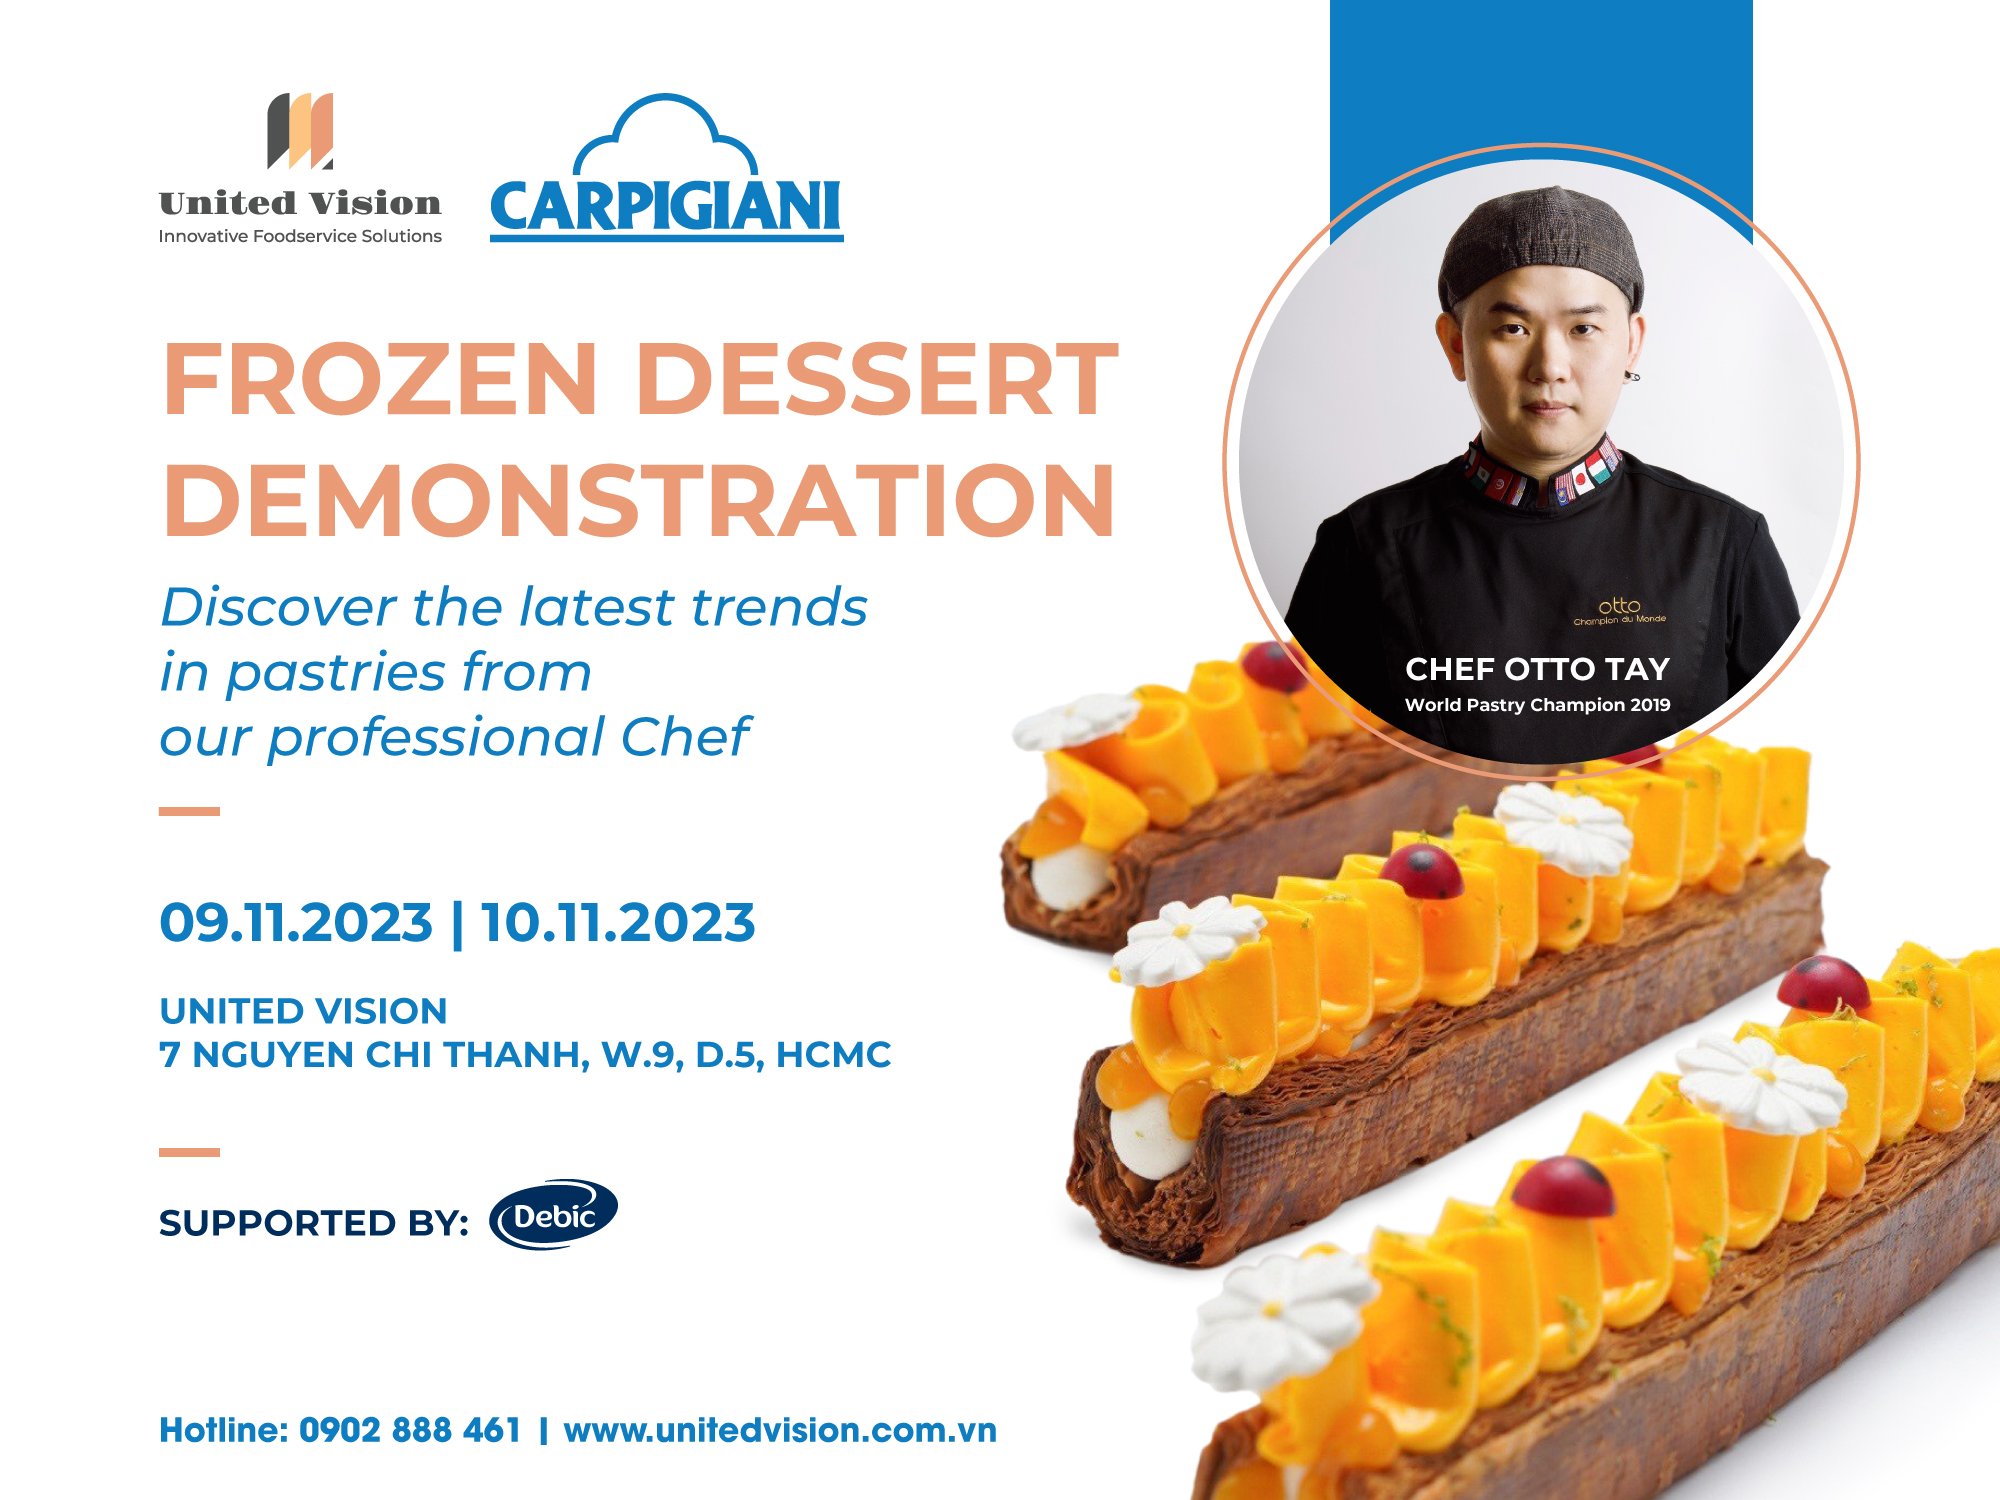 Frozen Dessert Demonstration - Opportunity To Exchange And Learn With Chef Otto Tay (World Champion 2019)